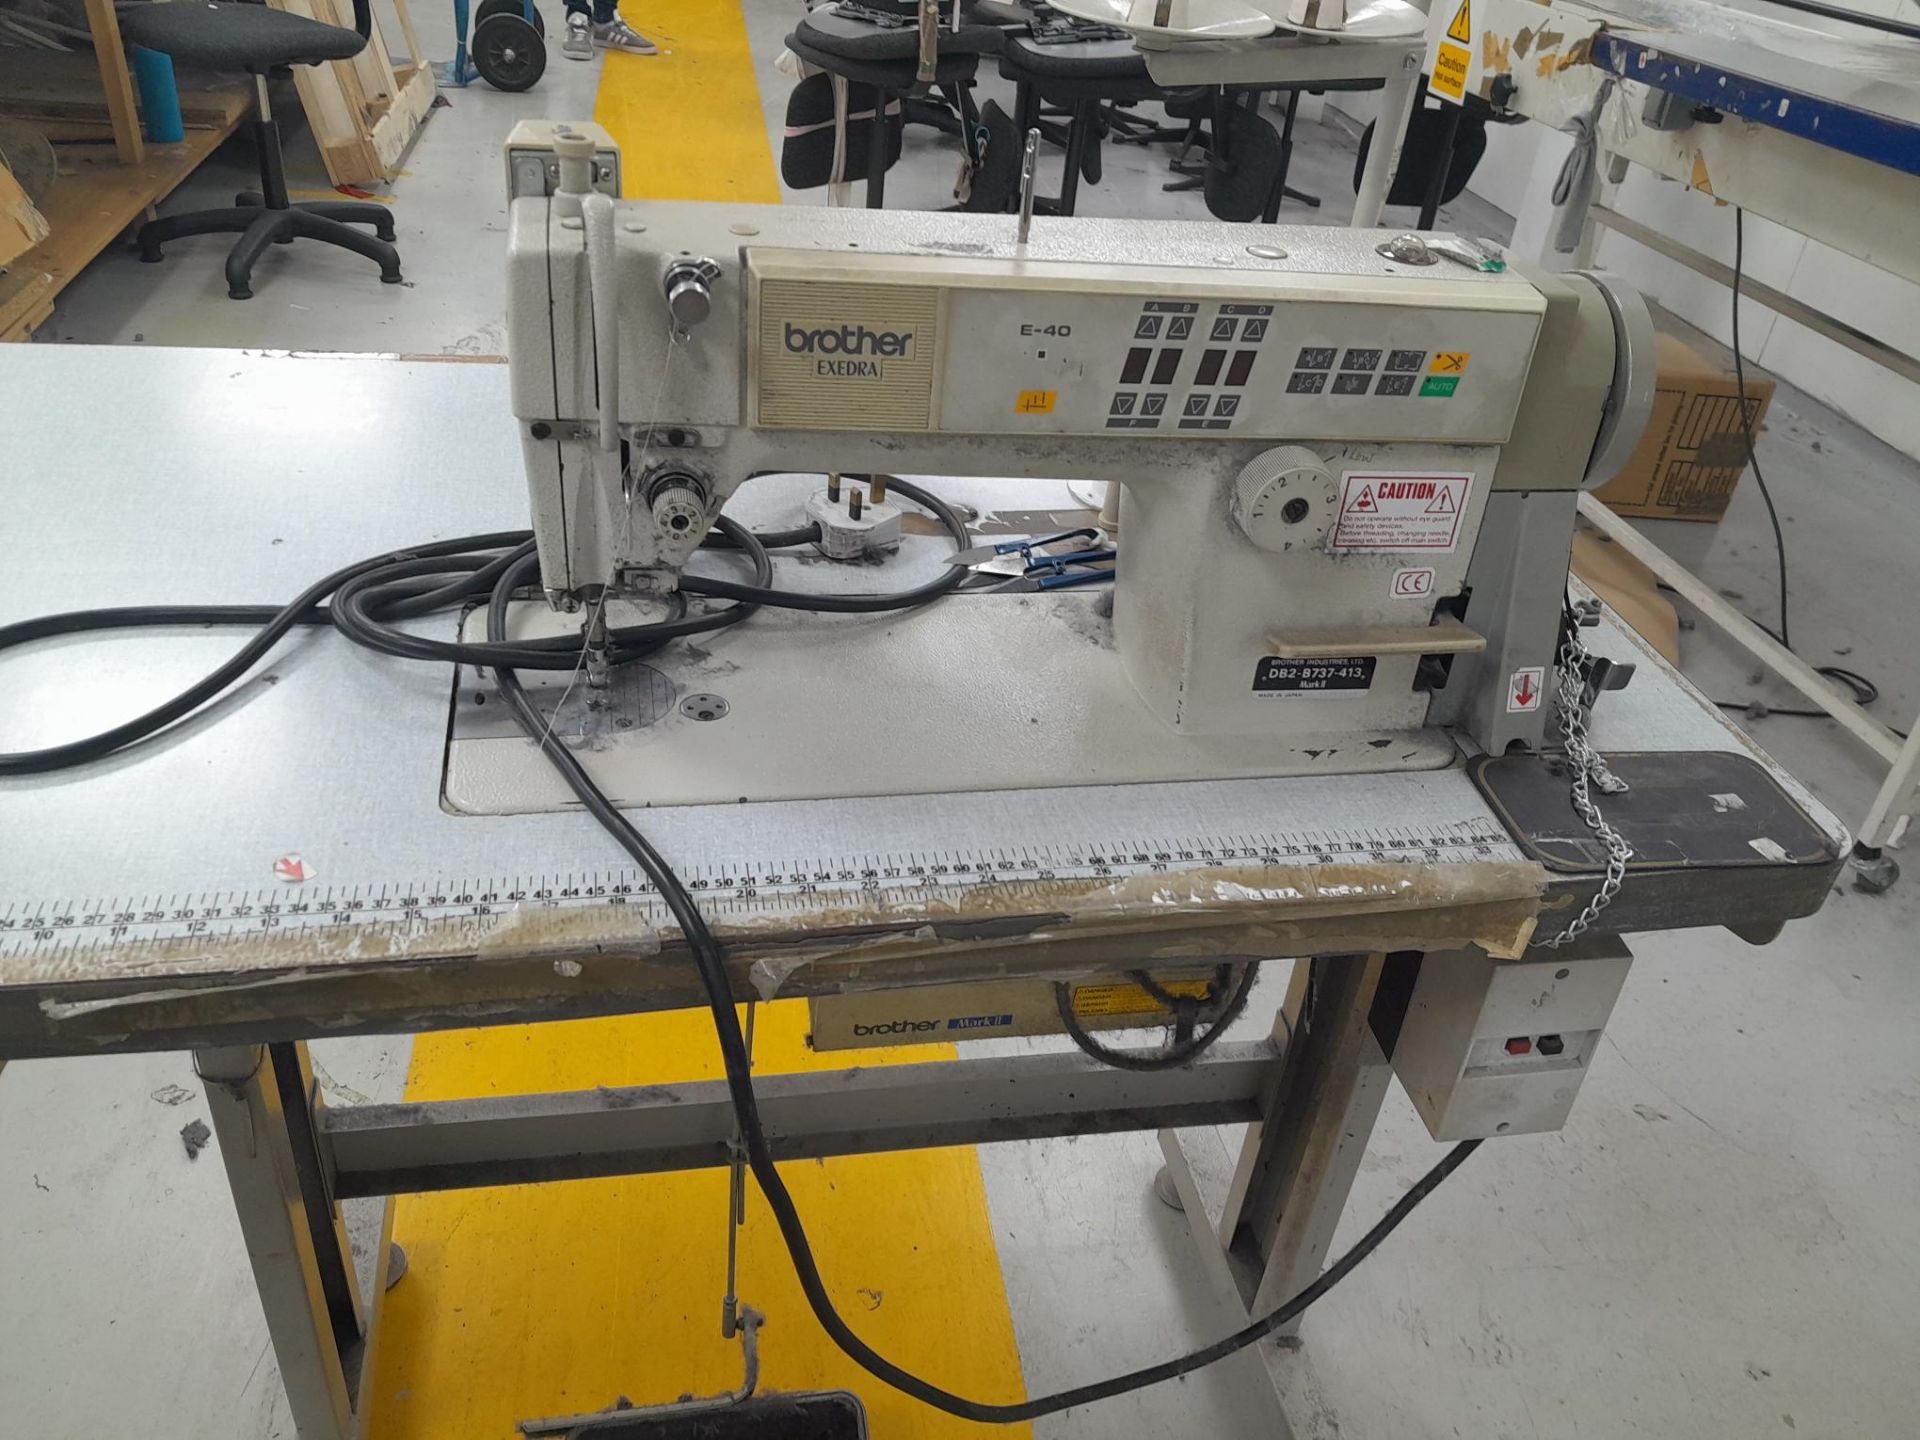 Brother E40 Exedra DB2-B737-413 Sewing Machine. - Image 2 of 4